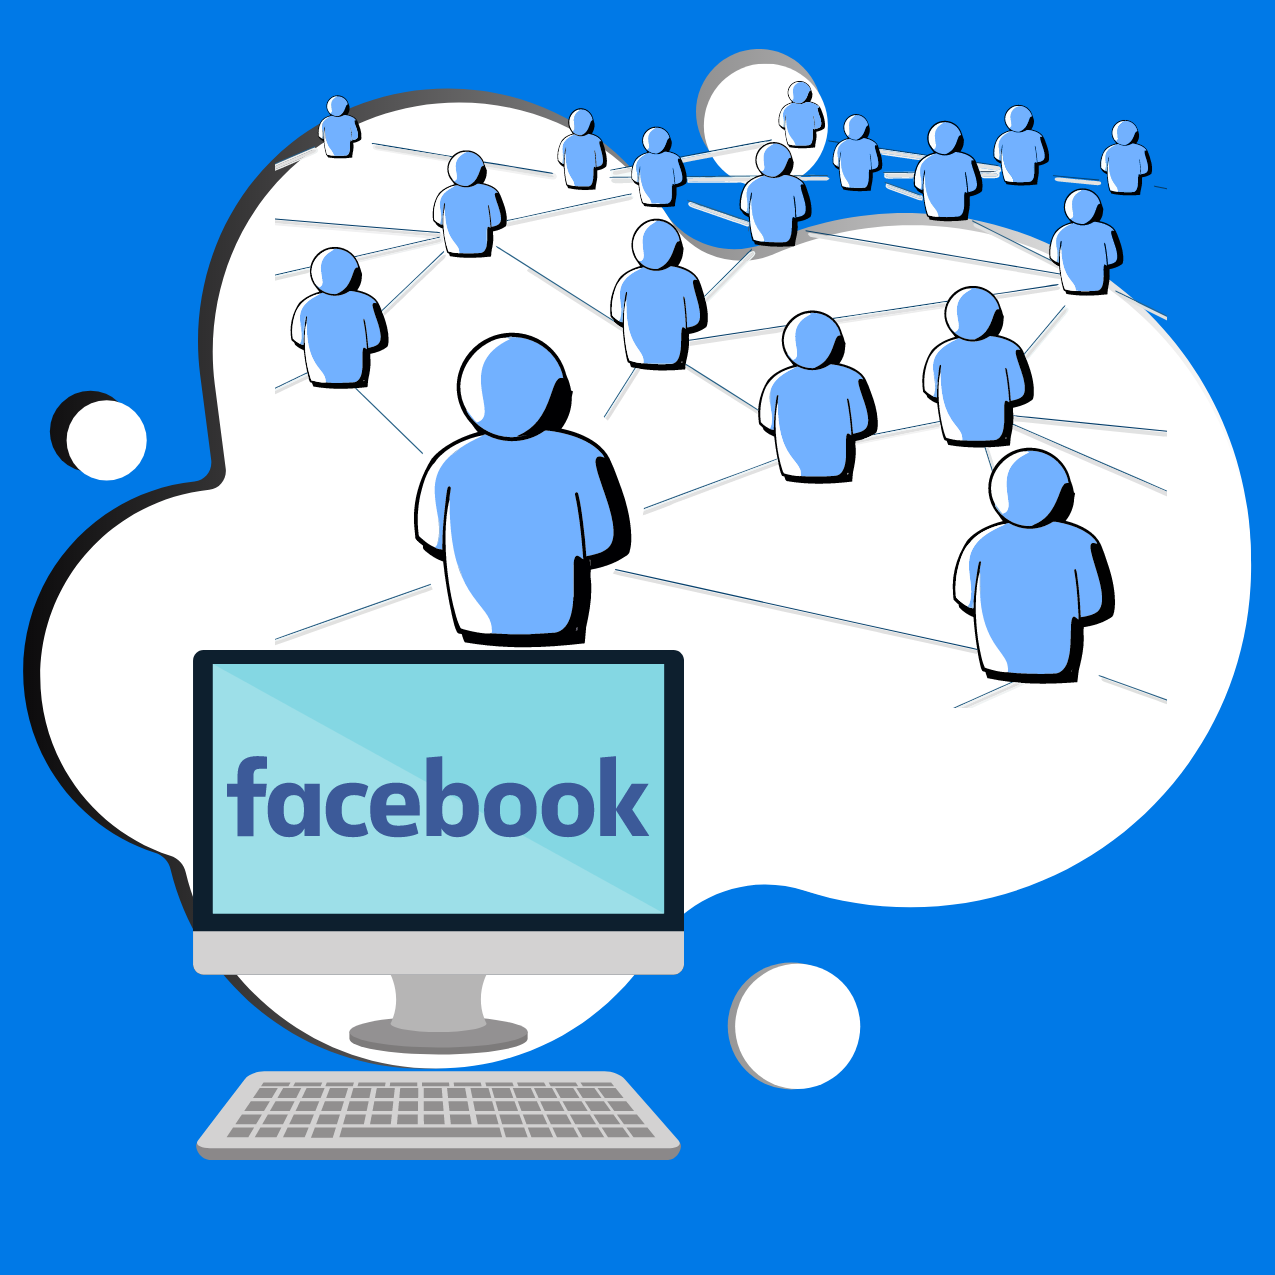 How To Make Money With Facebook Affiliate Marketing